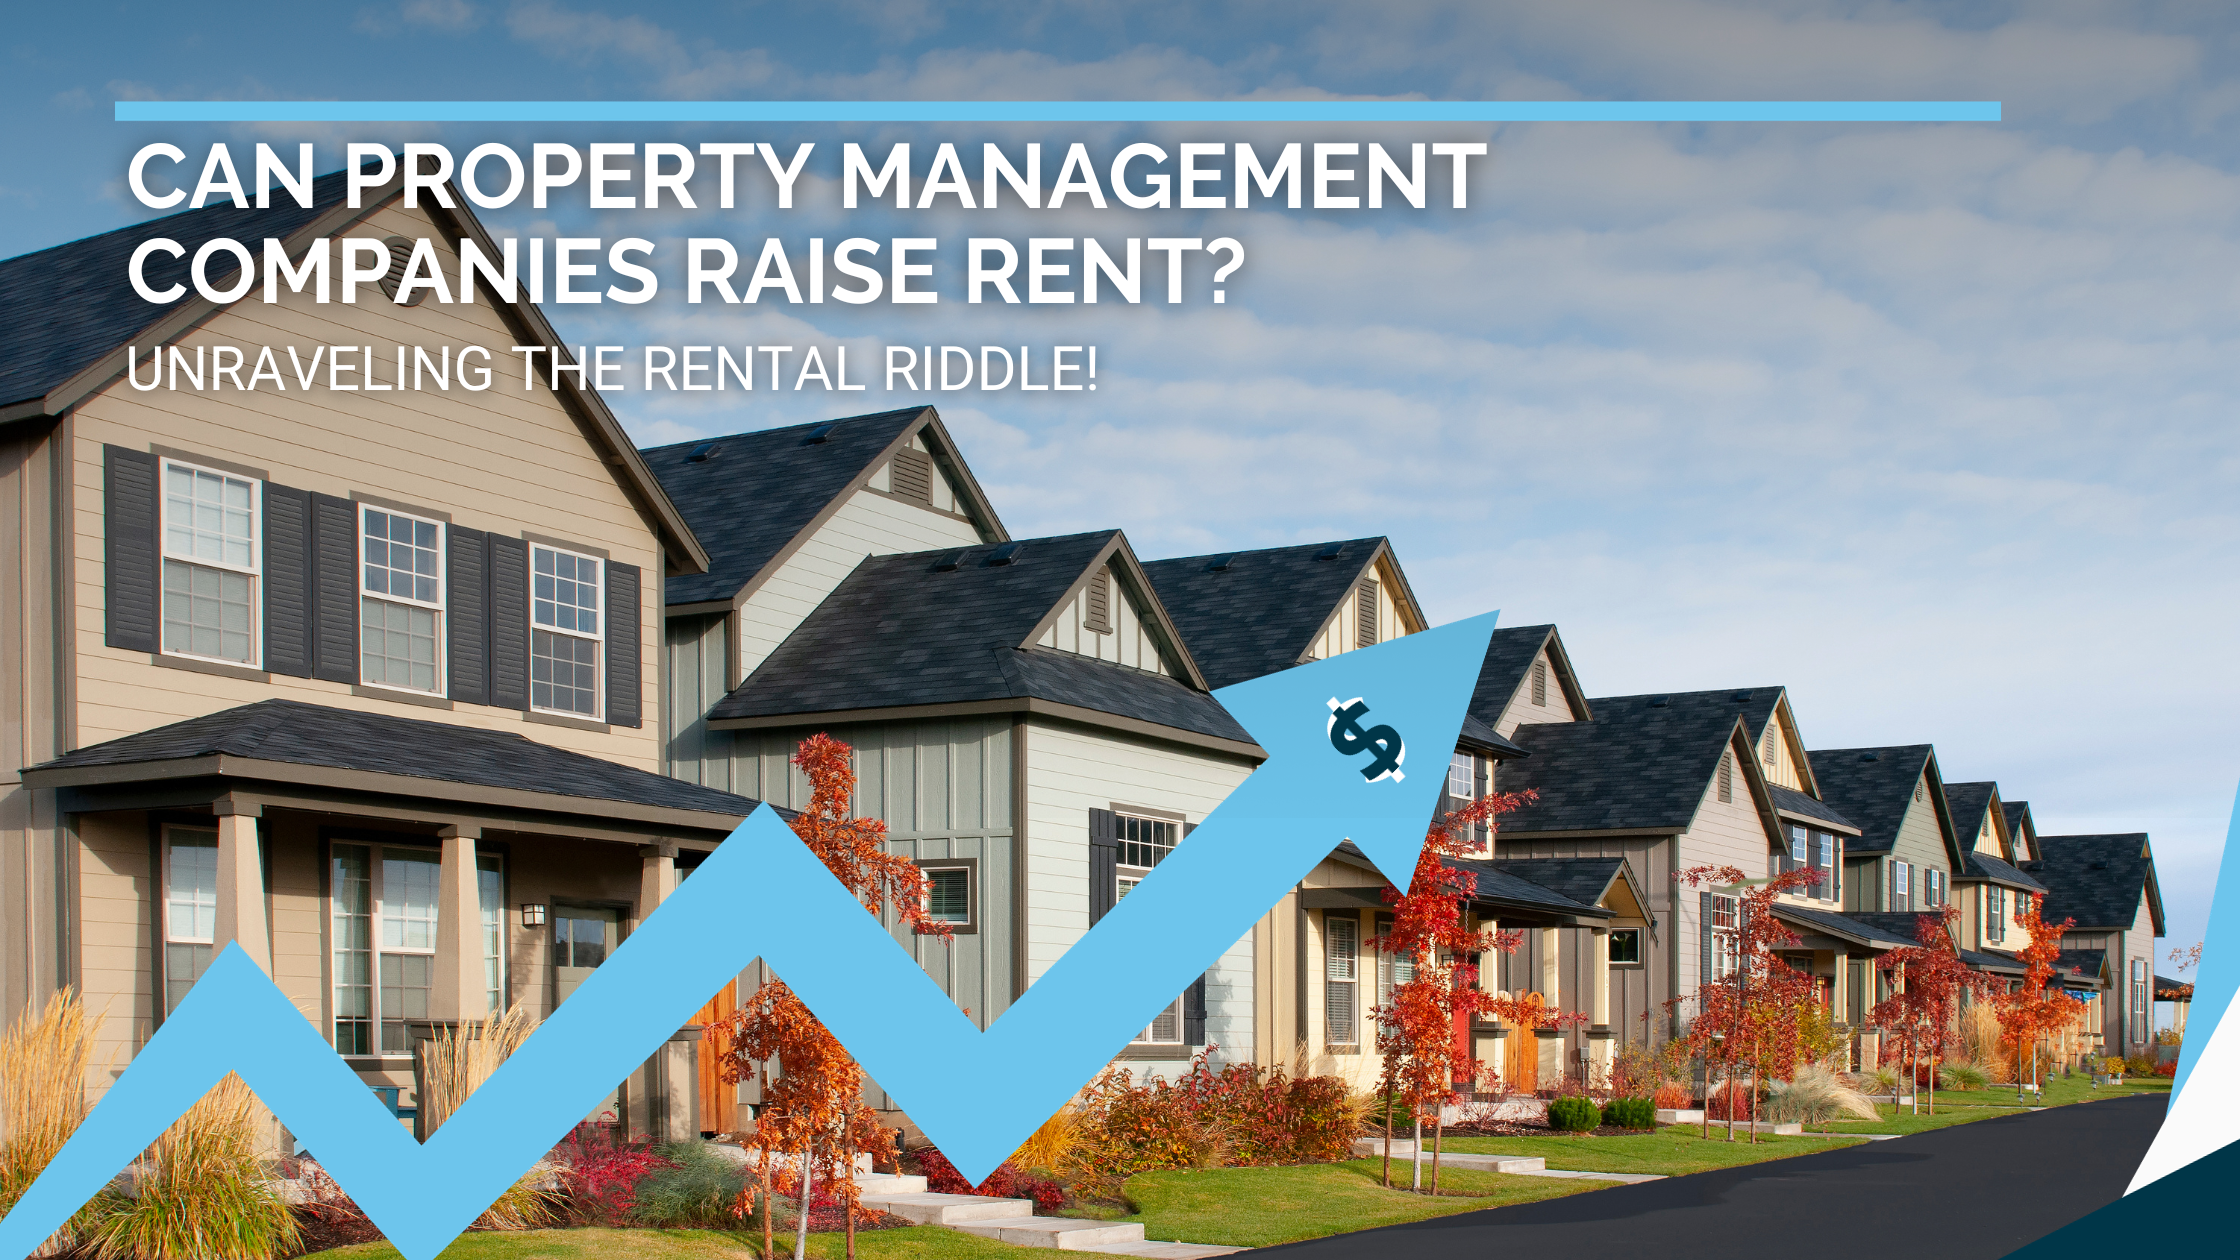 Can Property Management Companies Raise Rent? Unraveling the Rental Riddle!